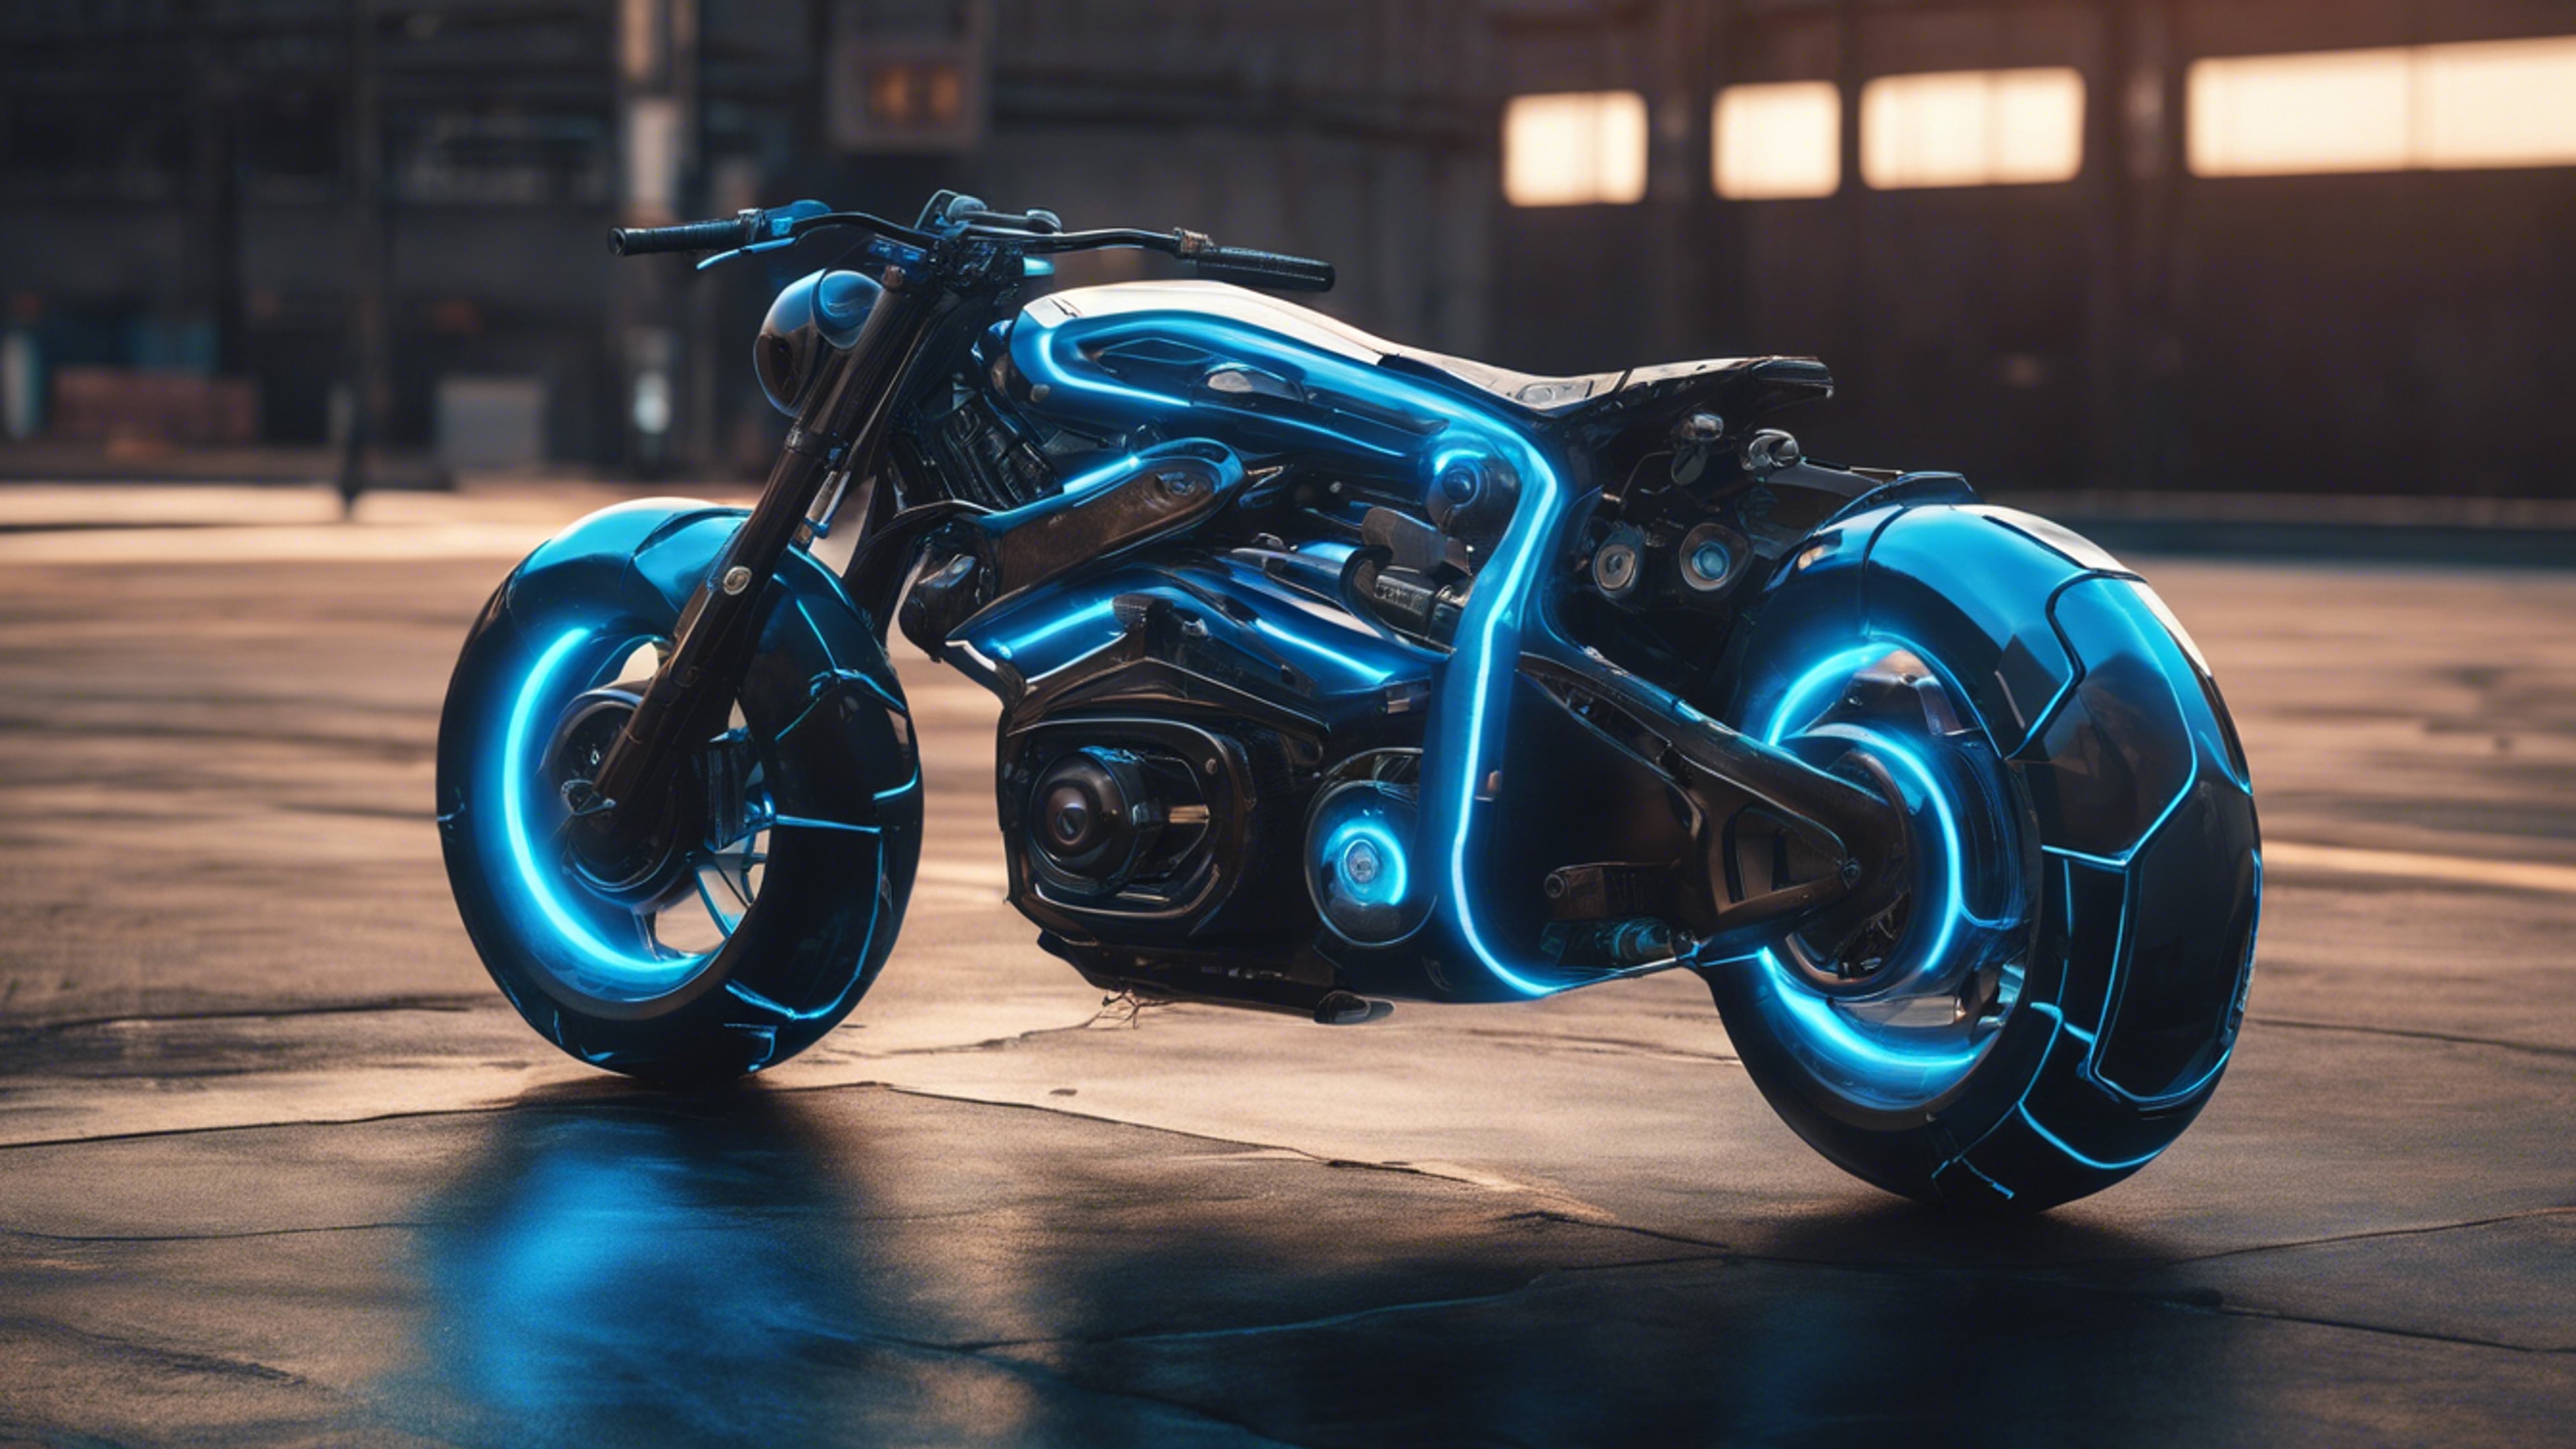 A concept art of a cool futuristic motorcycle, designed in neon black and blue colors. Валлпапер[616cf7a0093641f39ad2]